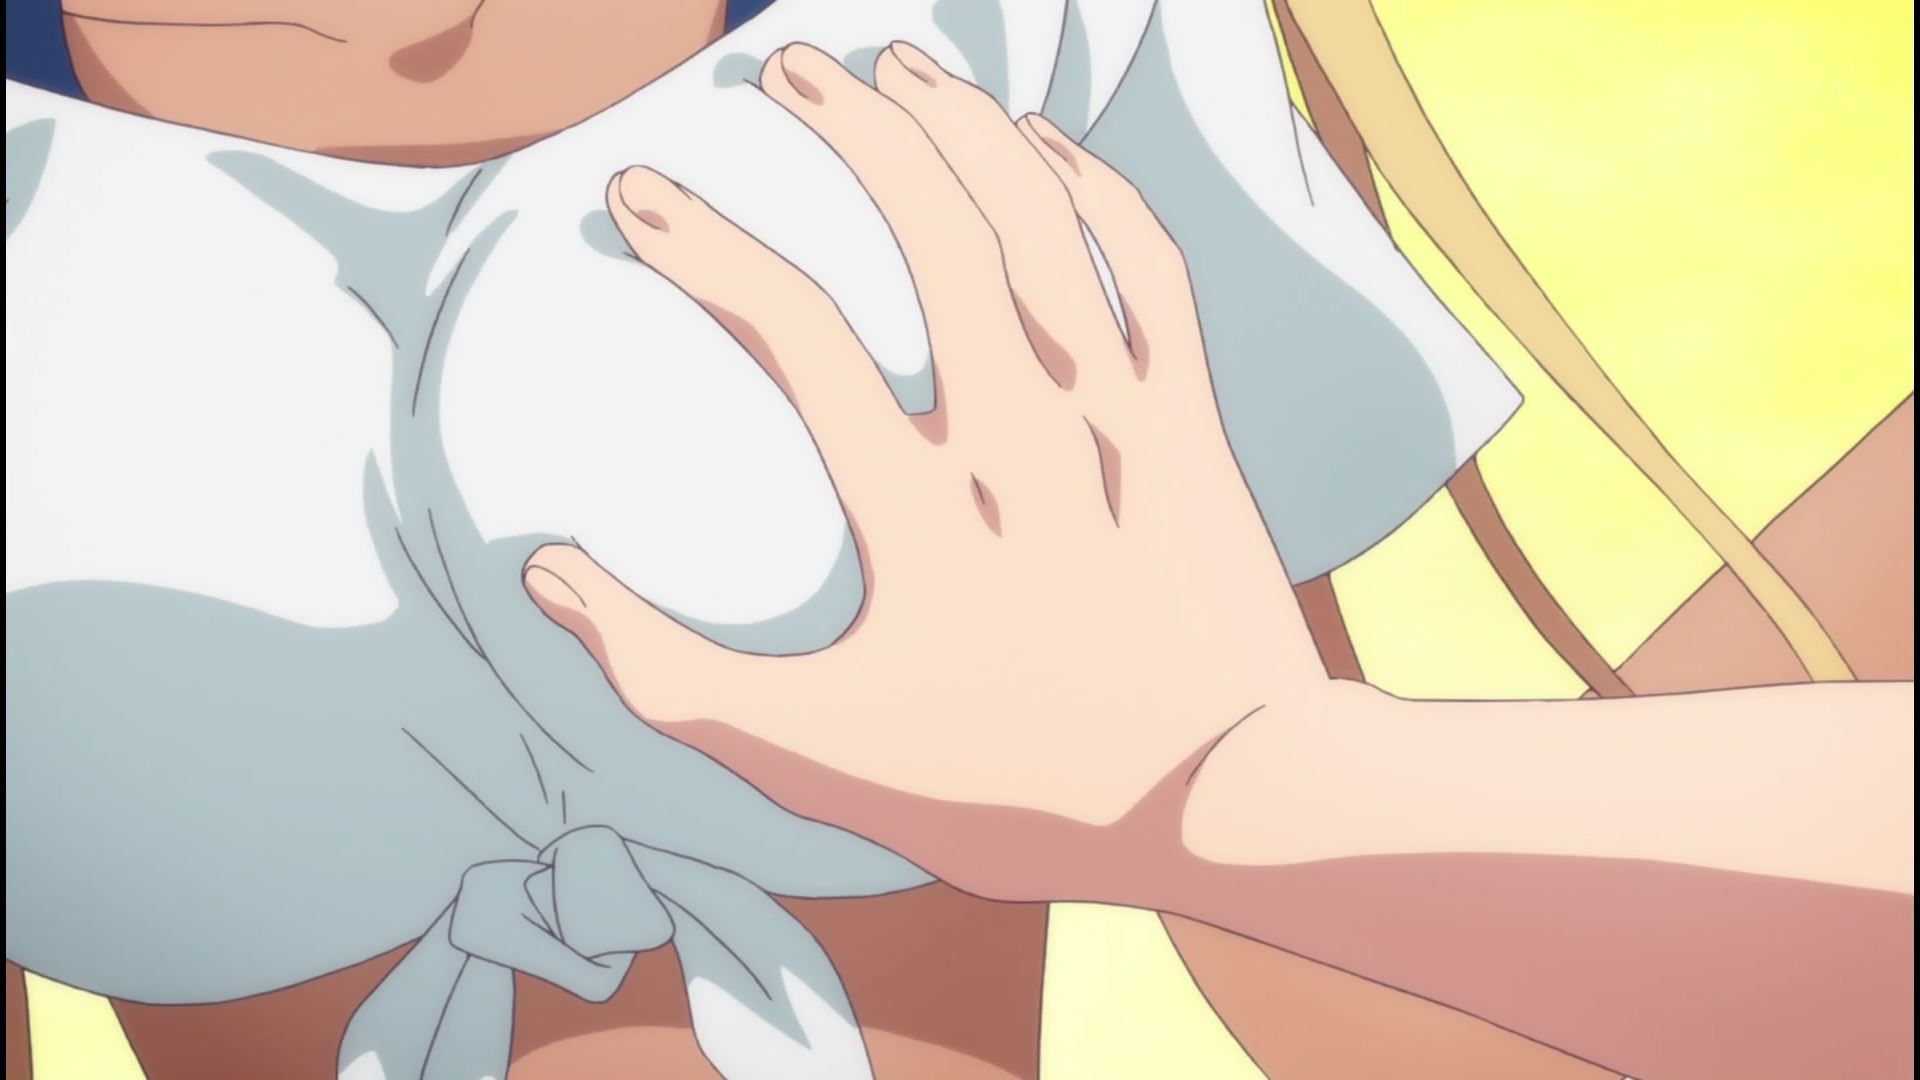 Erotic scenes such as erotic breast massage in the anime [Blend S] 7 story of girls in the tan appearance! 12